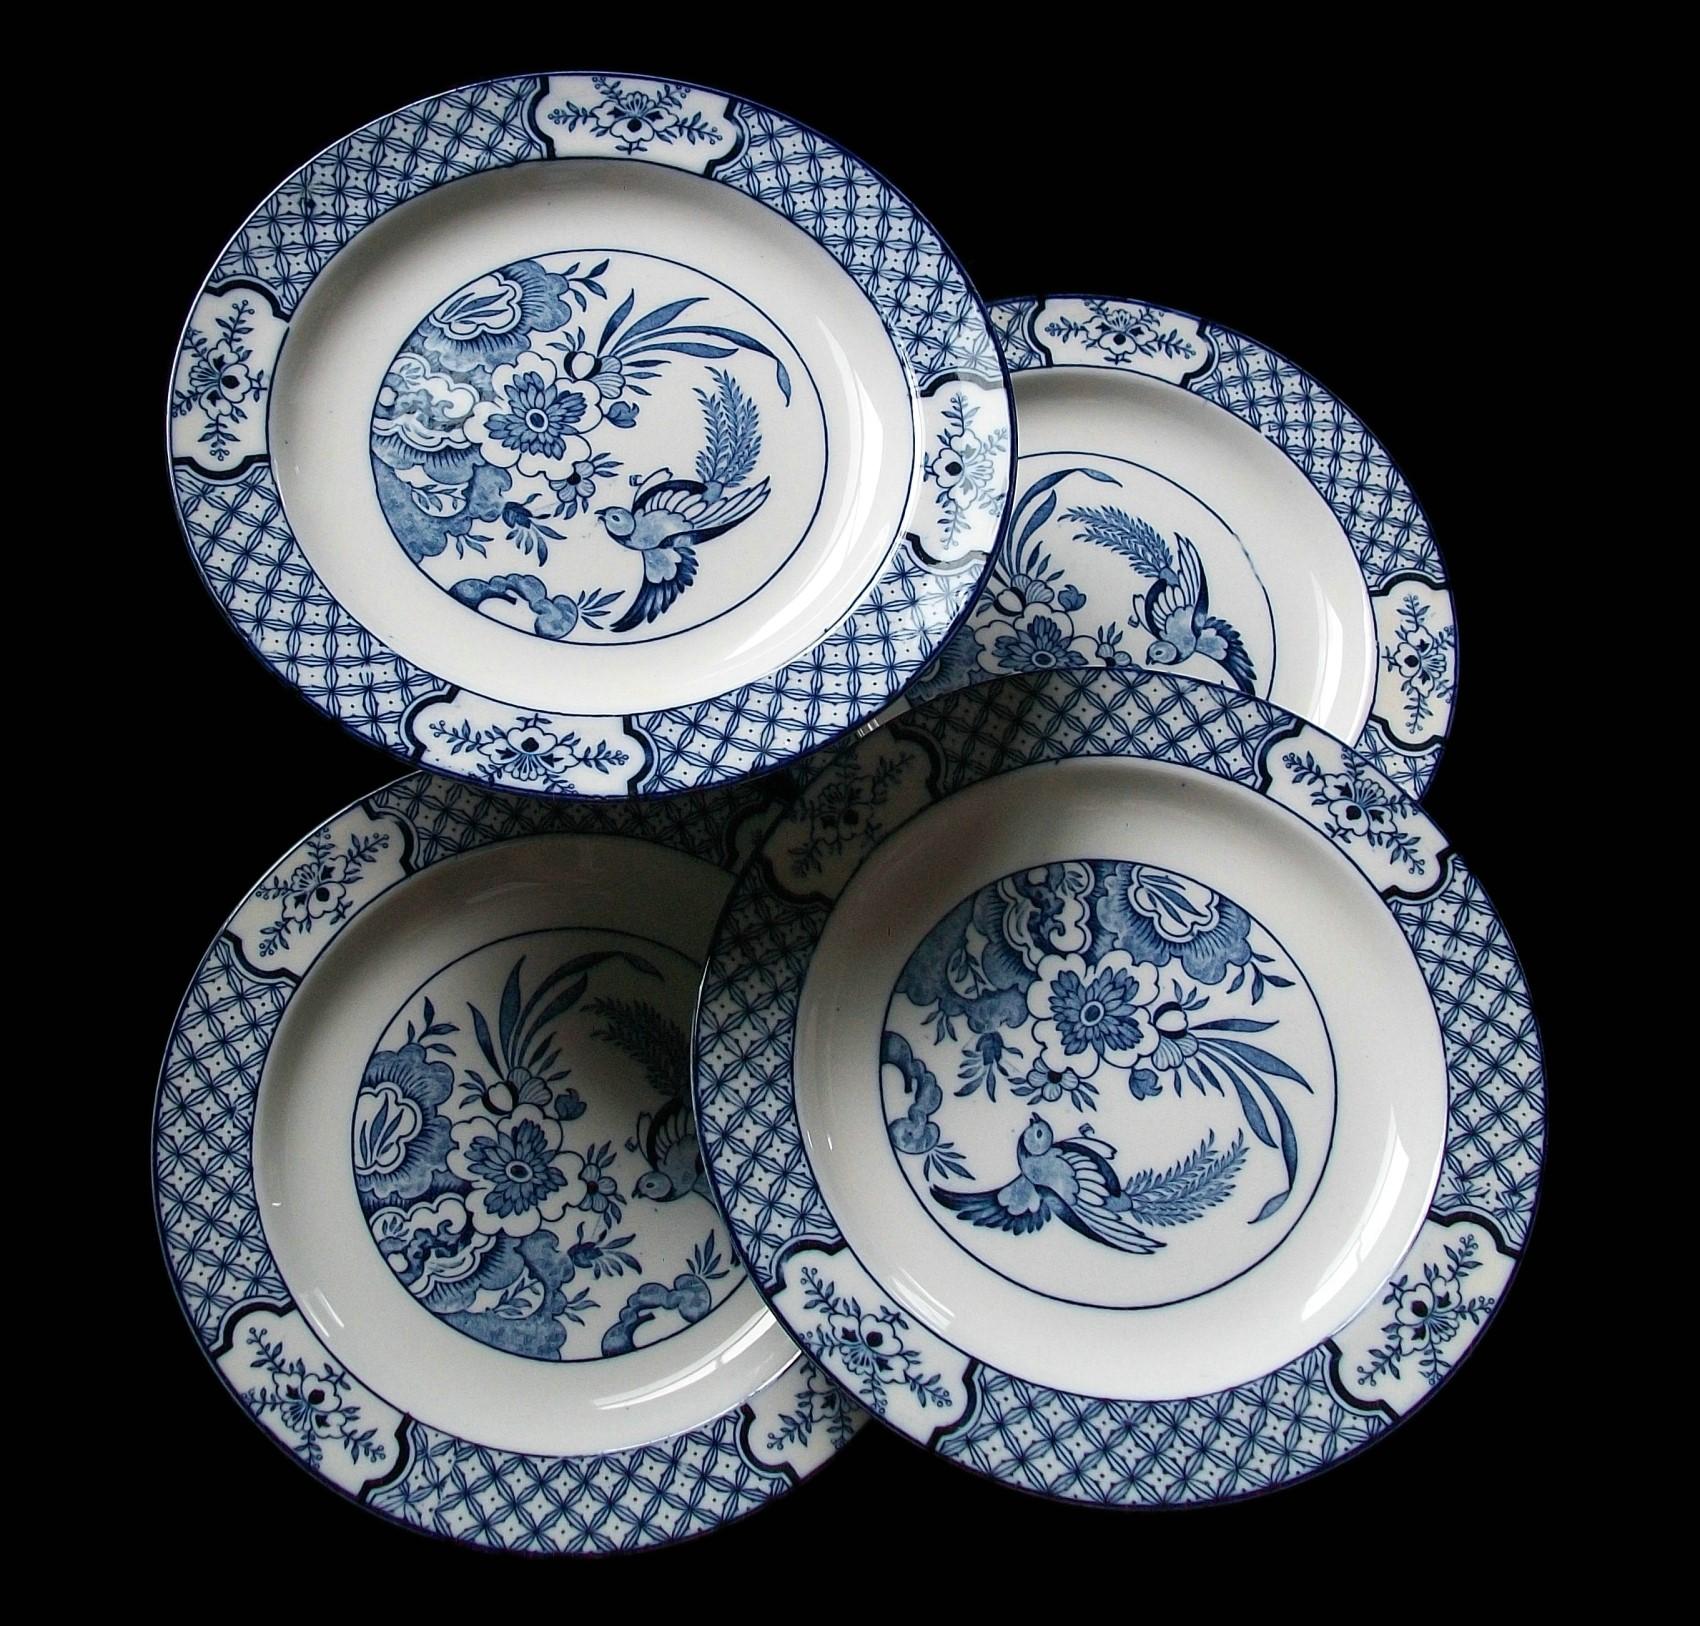 wood and sons plates